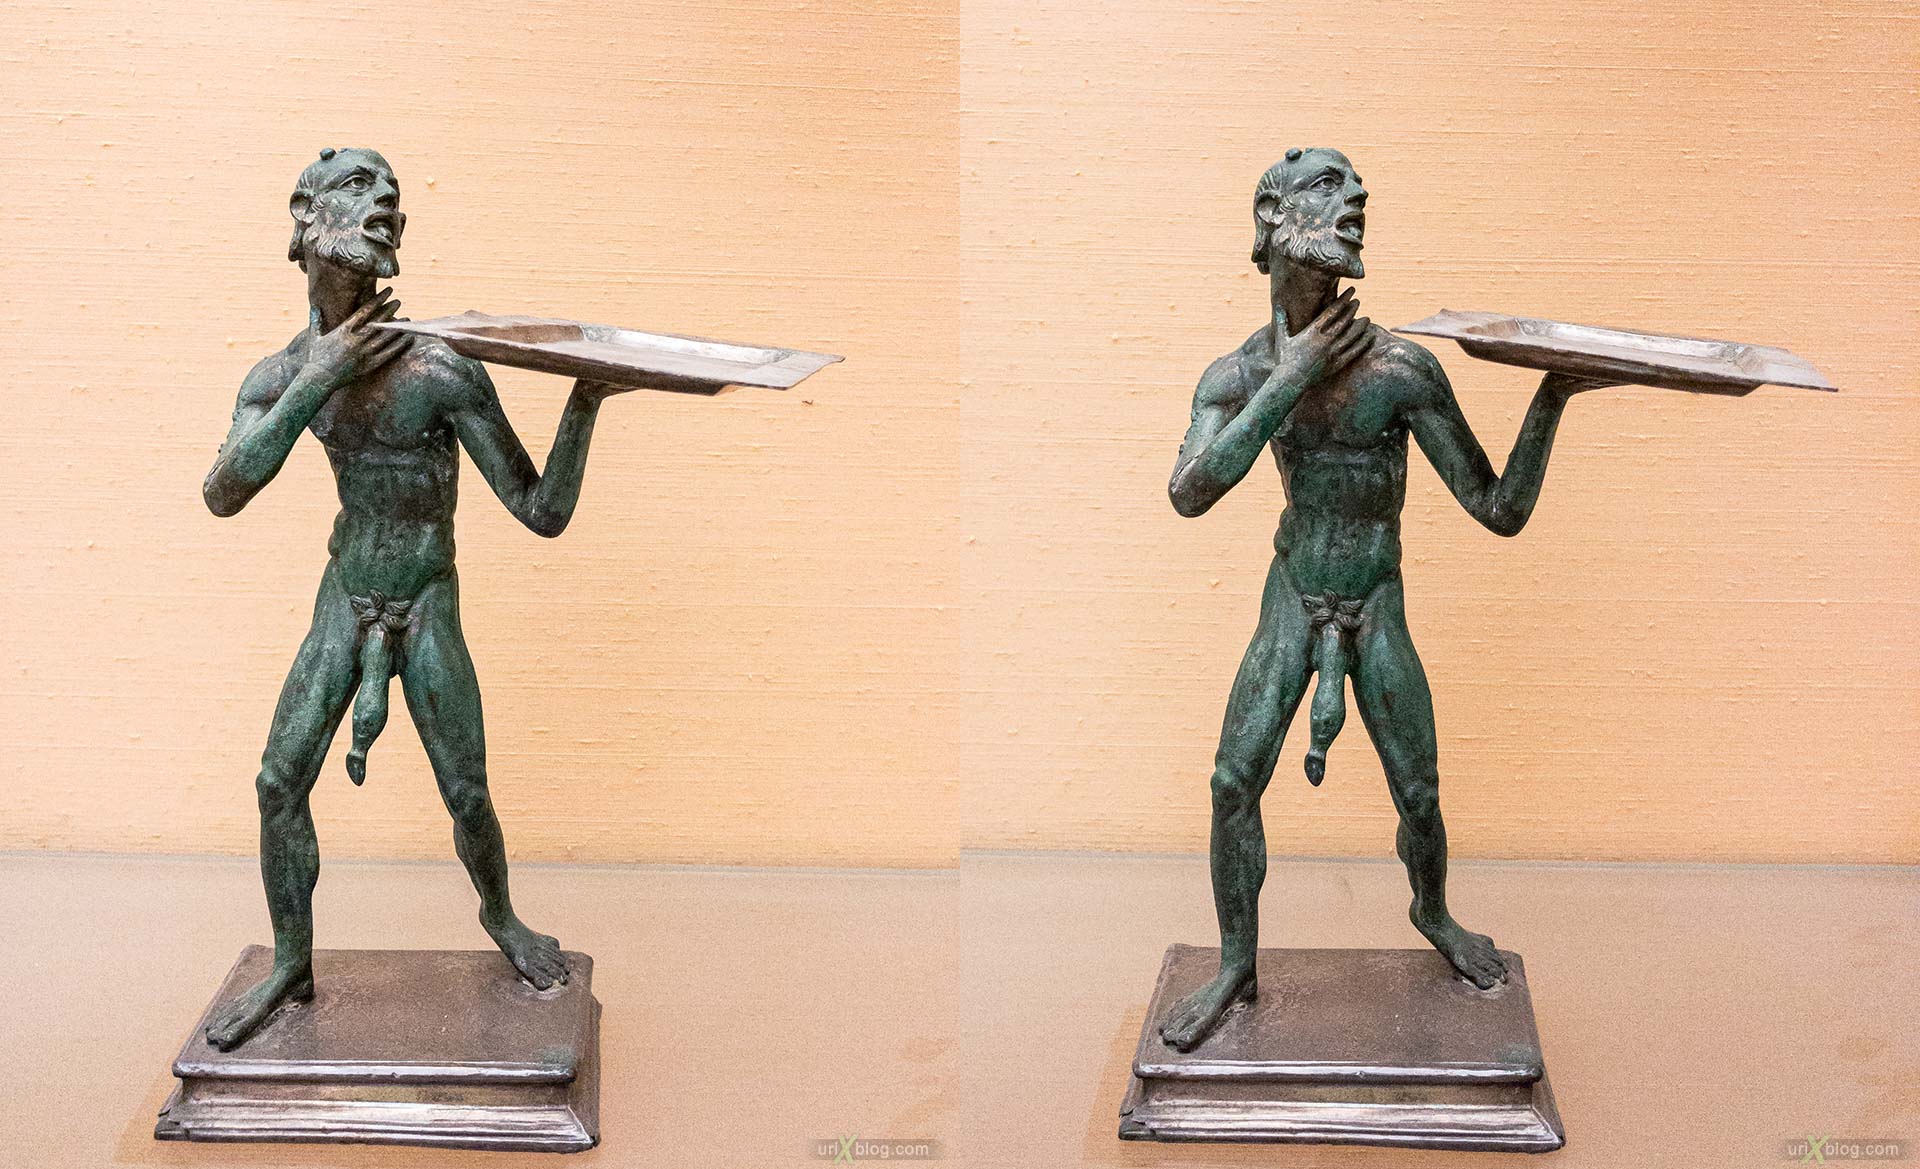 Secret cabinet, National Archaeological Museum of Naples, figurine, erotics, ancient Rome, Pompei, exhibition, Naples, Italy, 3D, stereo pair, cross-eyed, crossview, cross view stereo pair, stereoscopic